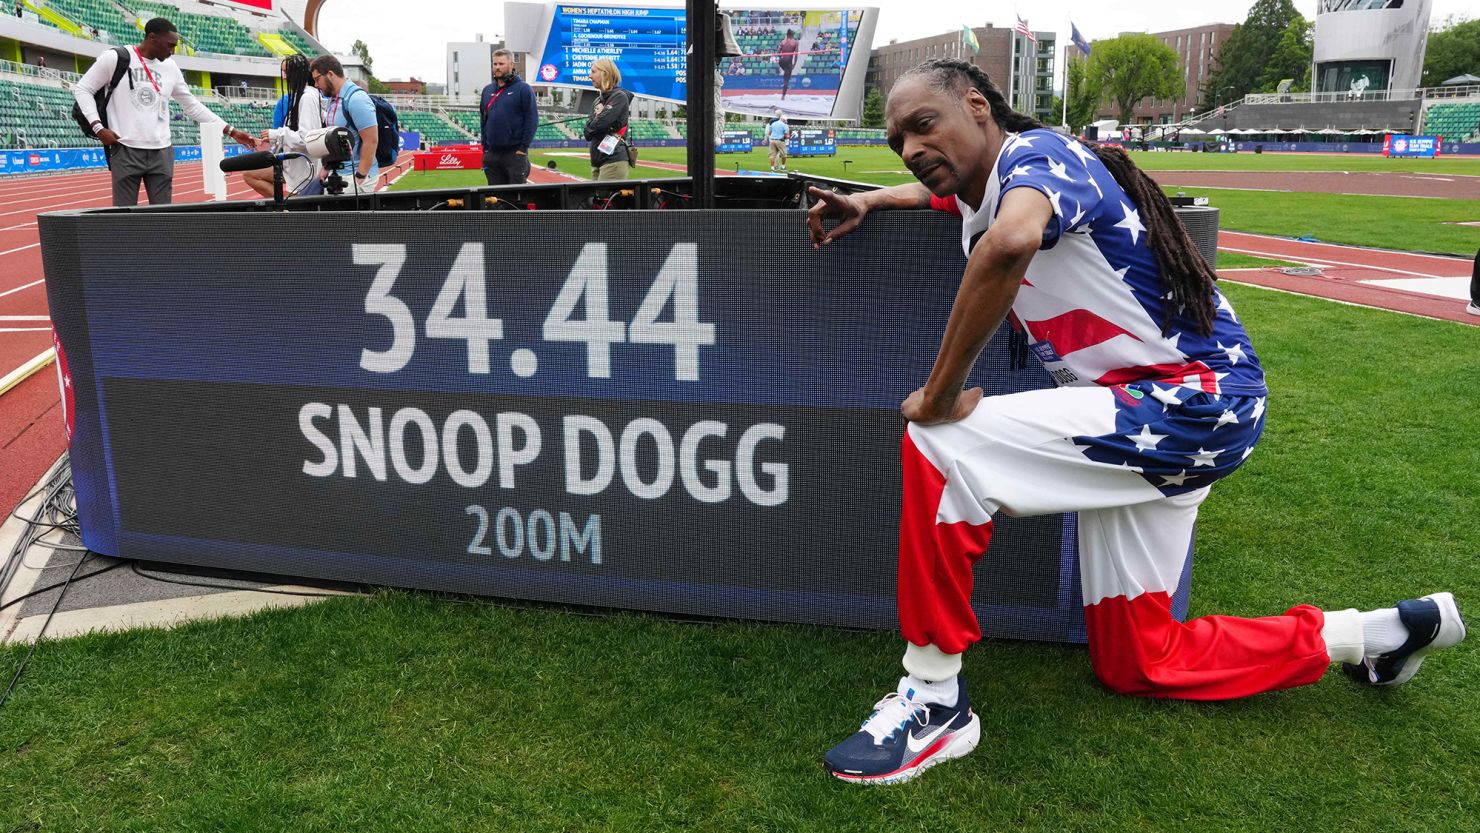 Snoop Dogg poses with his time after running the 200m in a guest appearance at the US Olympic trials.